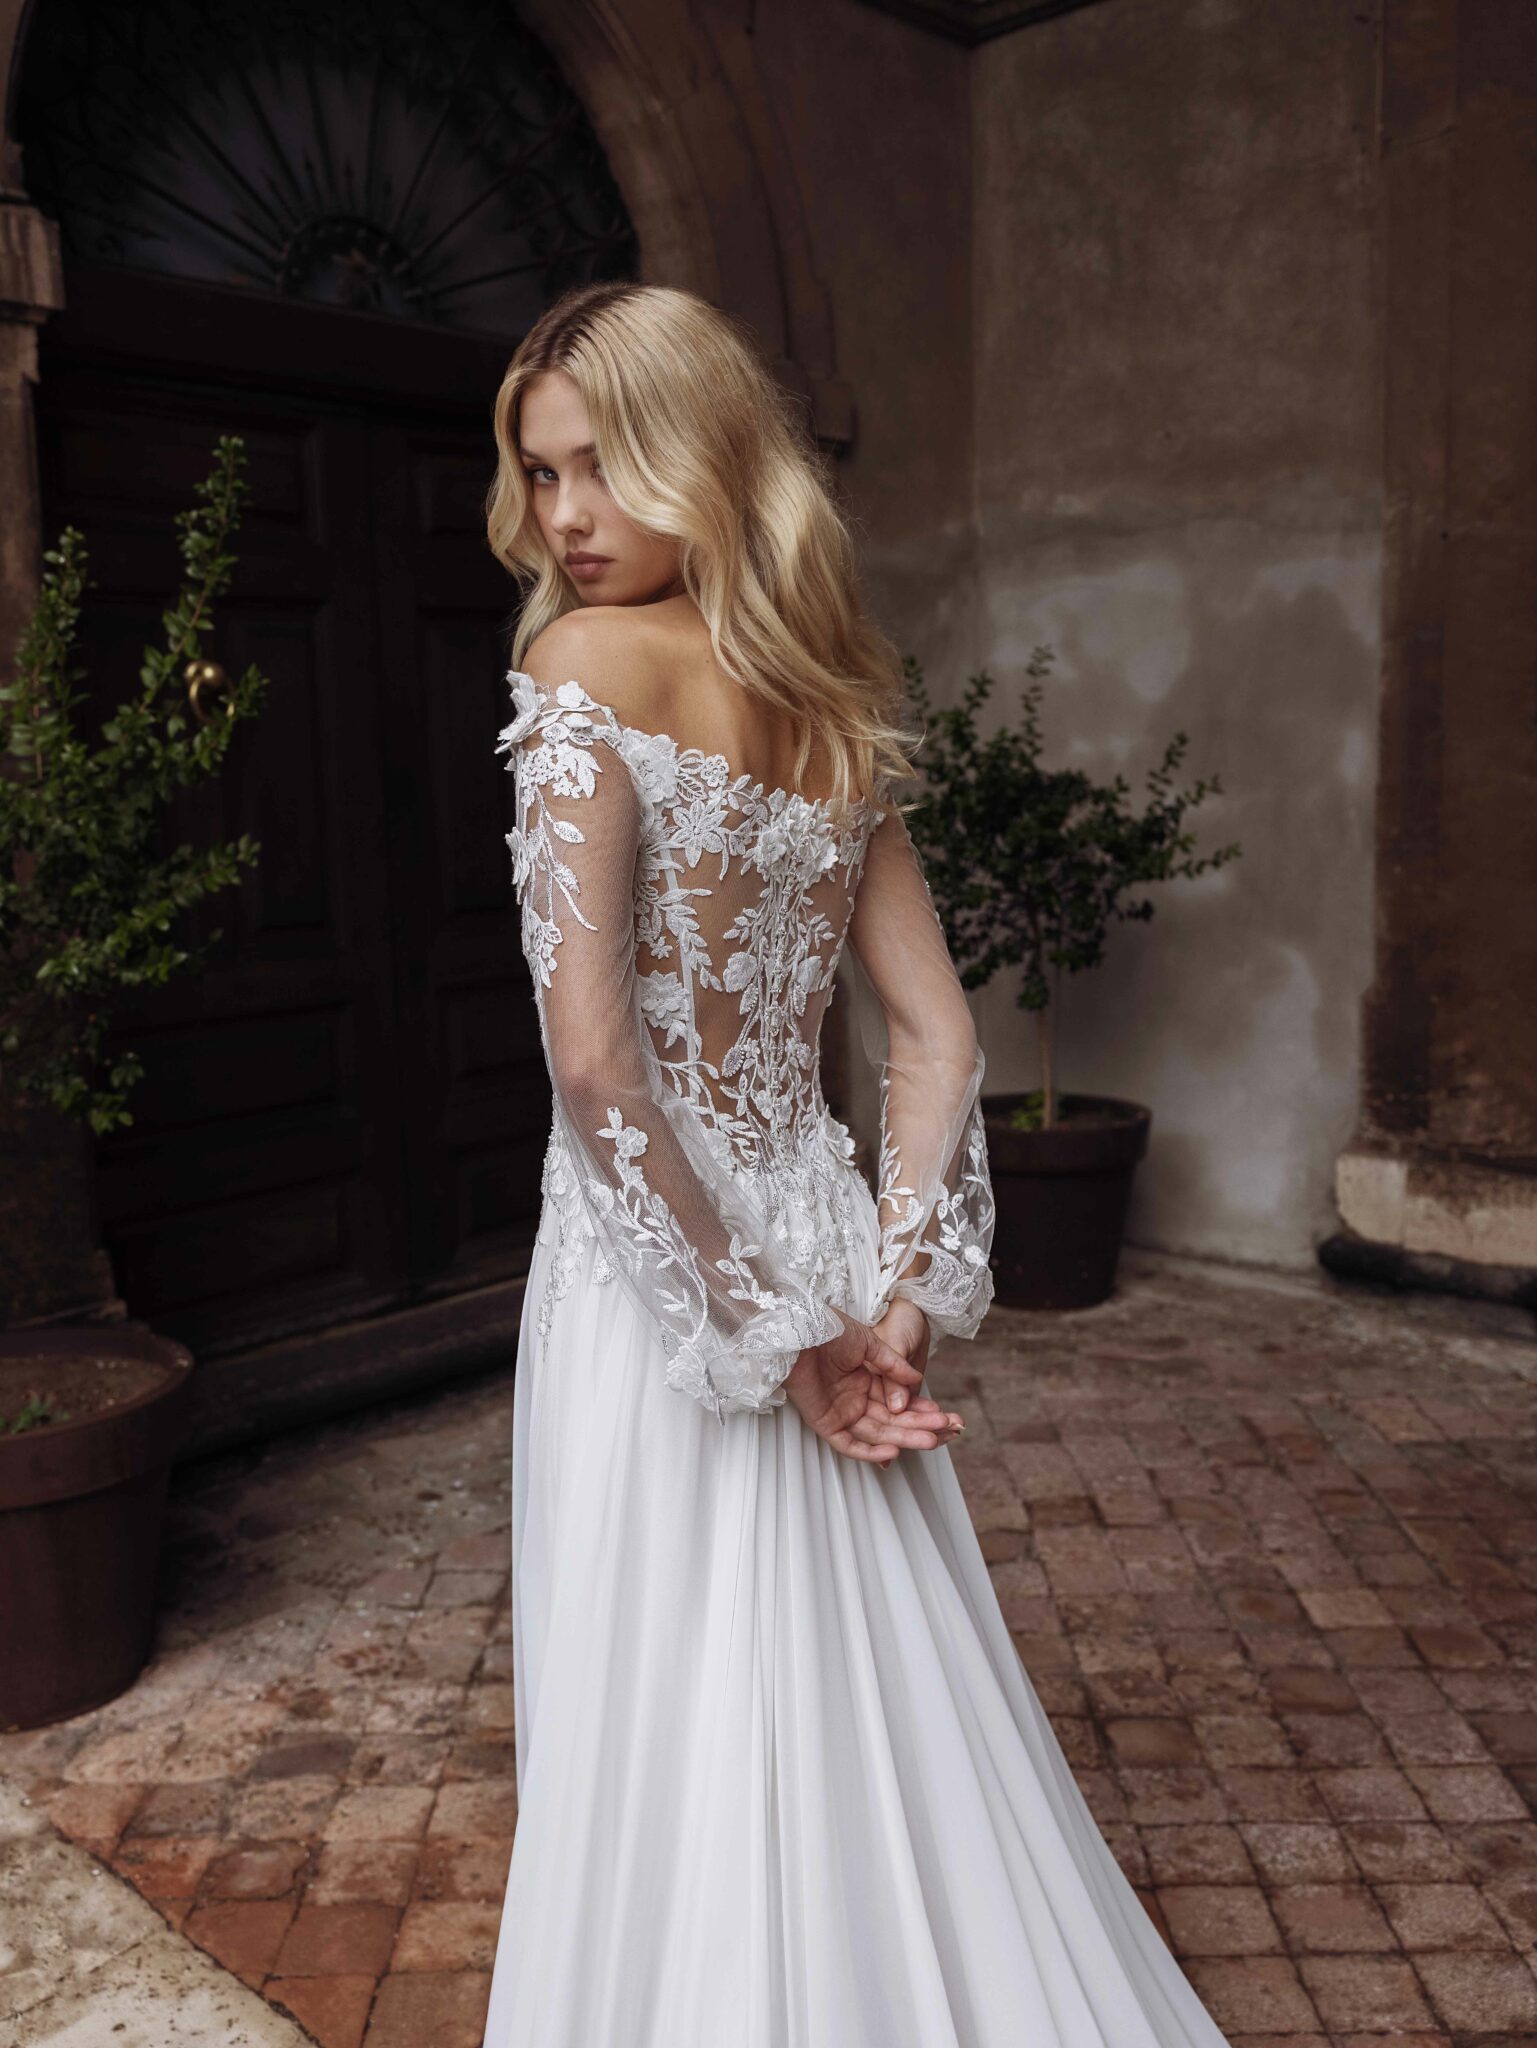 Reynolds by Modeca | To Cherish Bridal Boutique